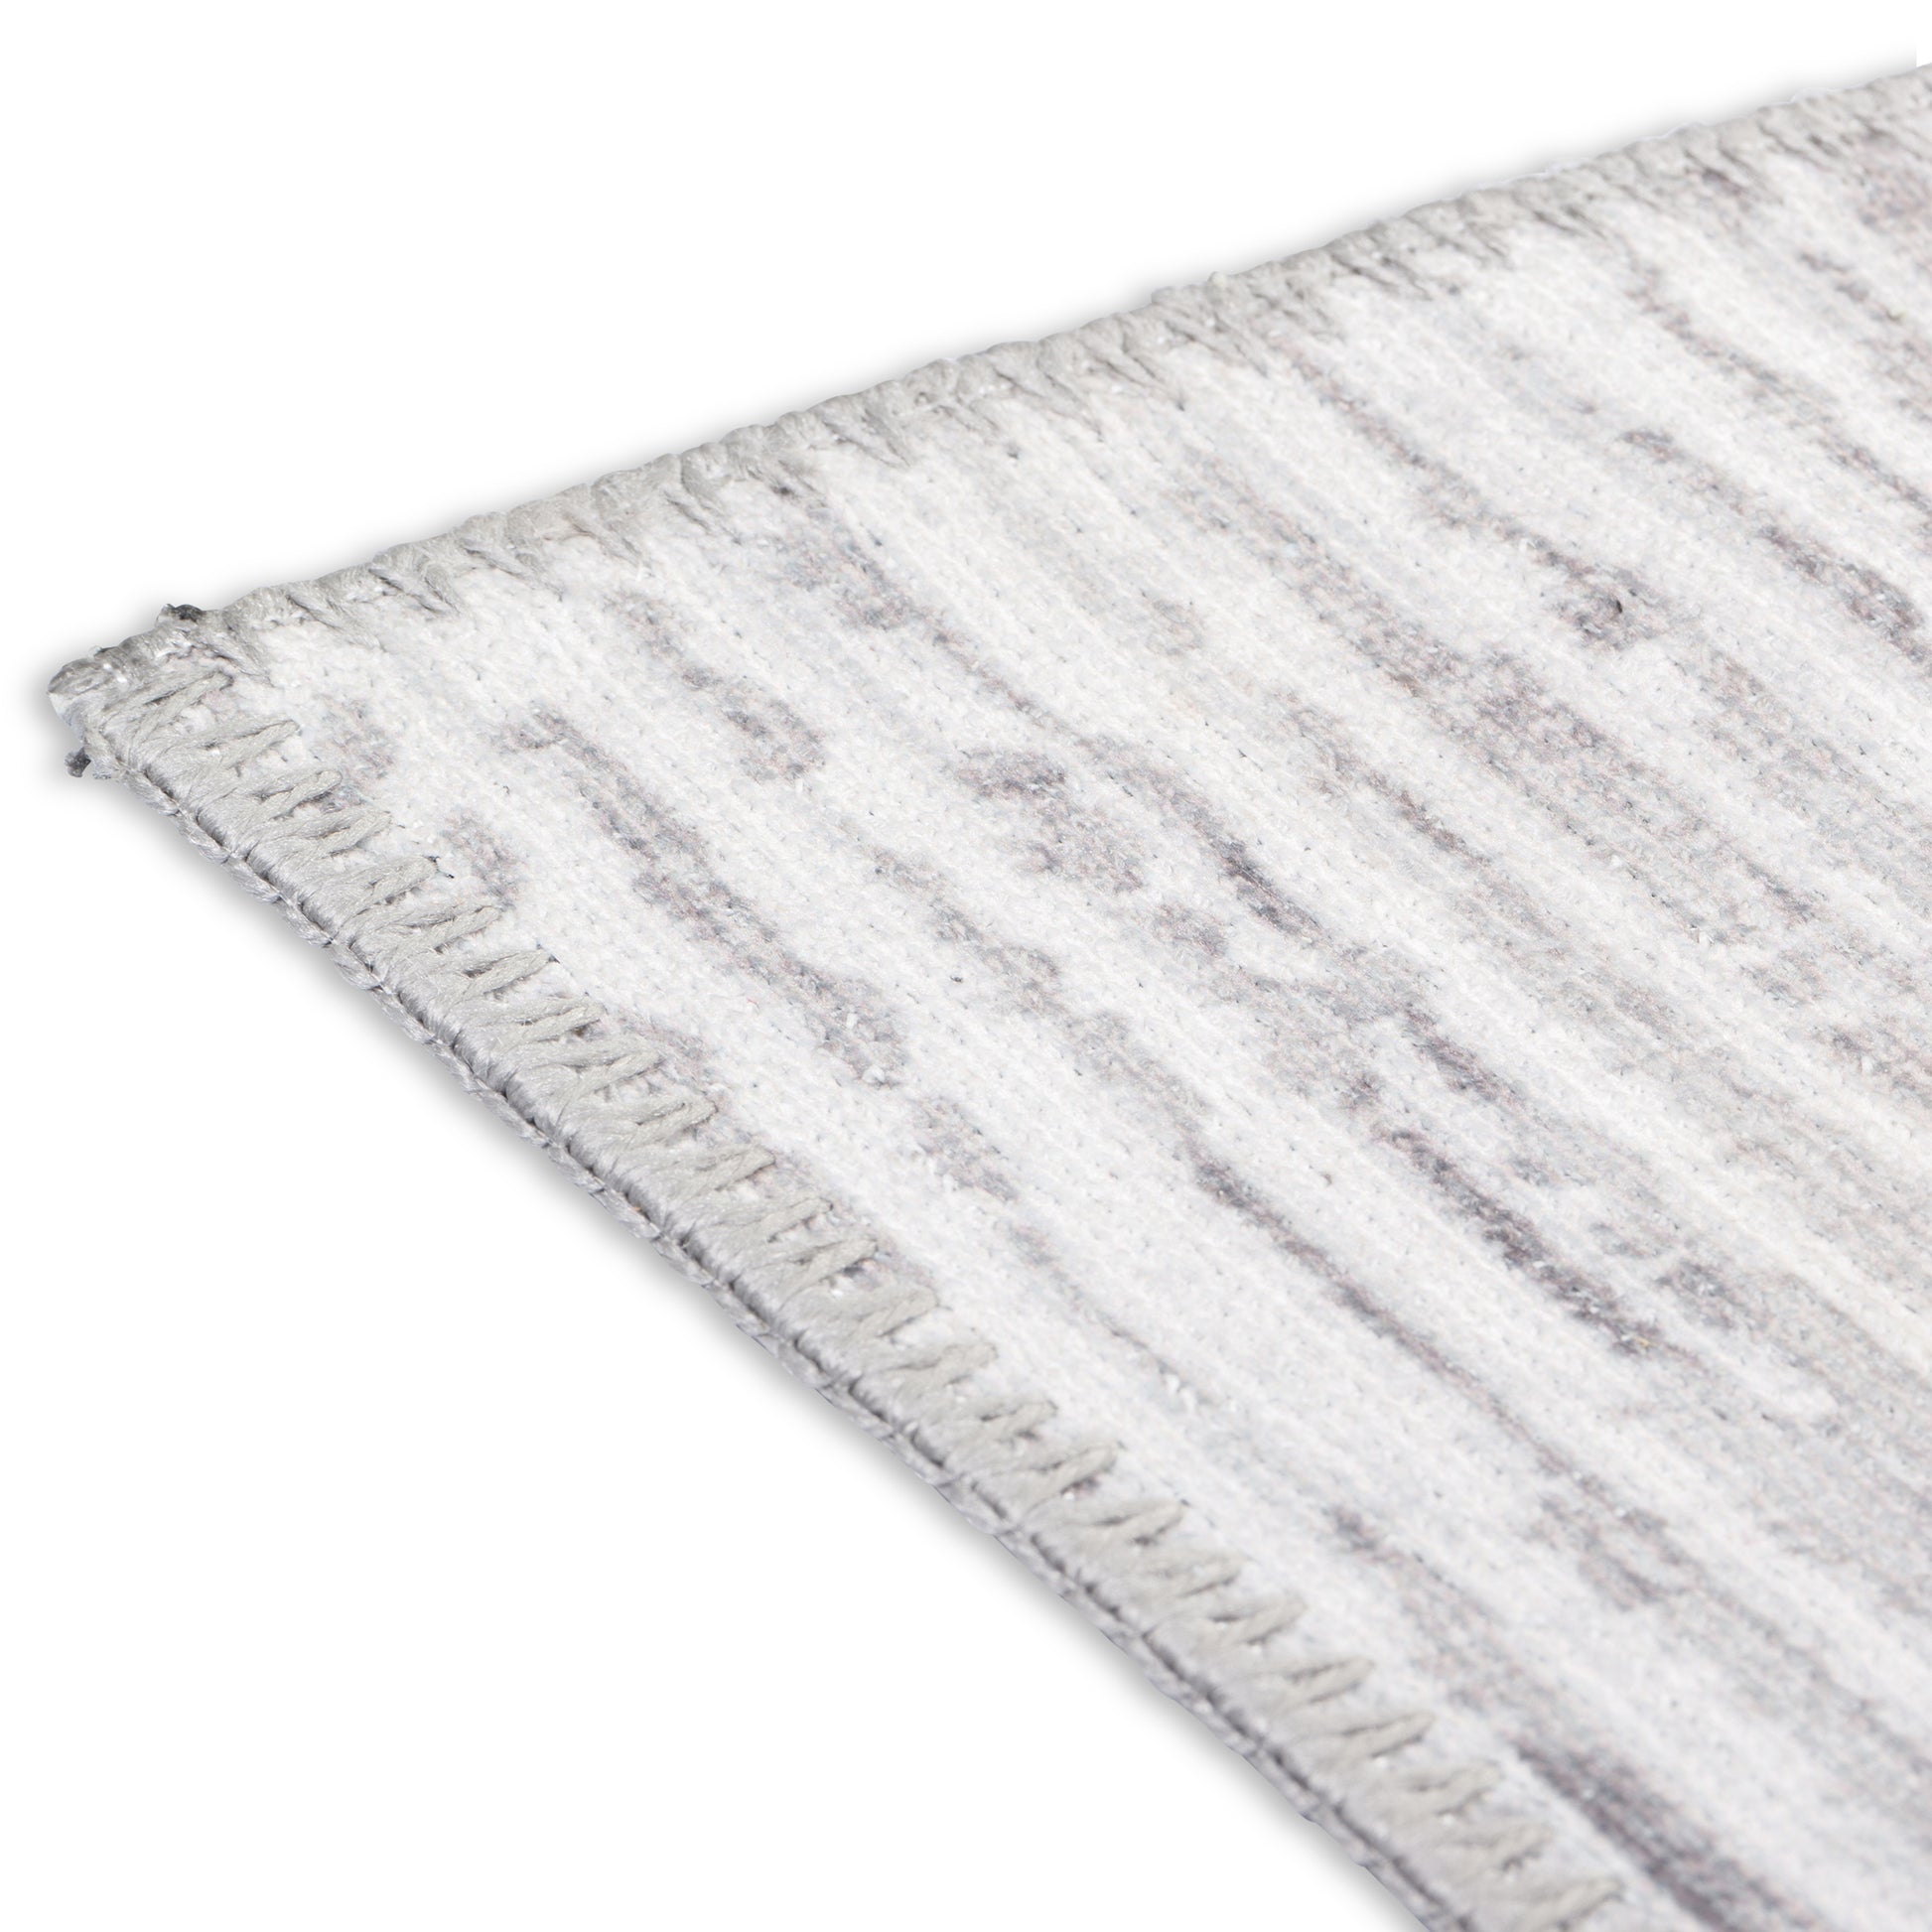 Aura spill proof, machine-washable, and slip resistant indoor area rug, carpets, indoor carpets, easy to clean